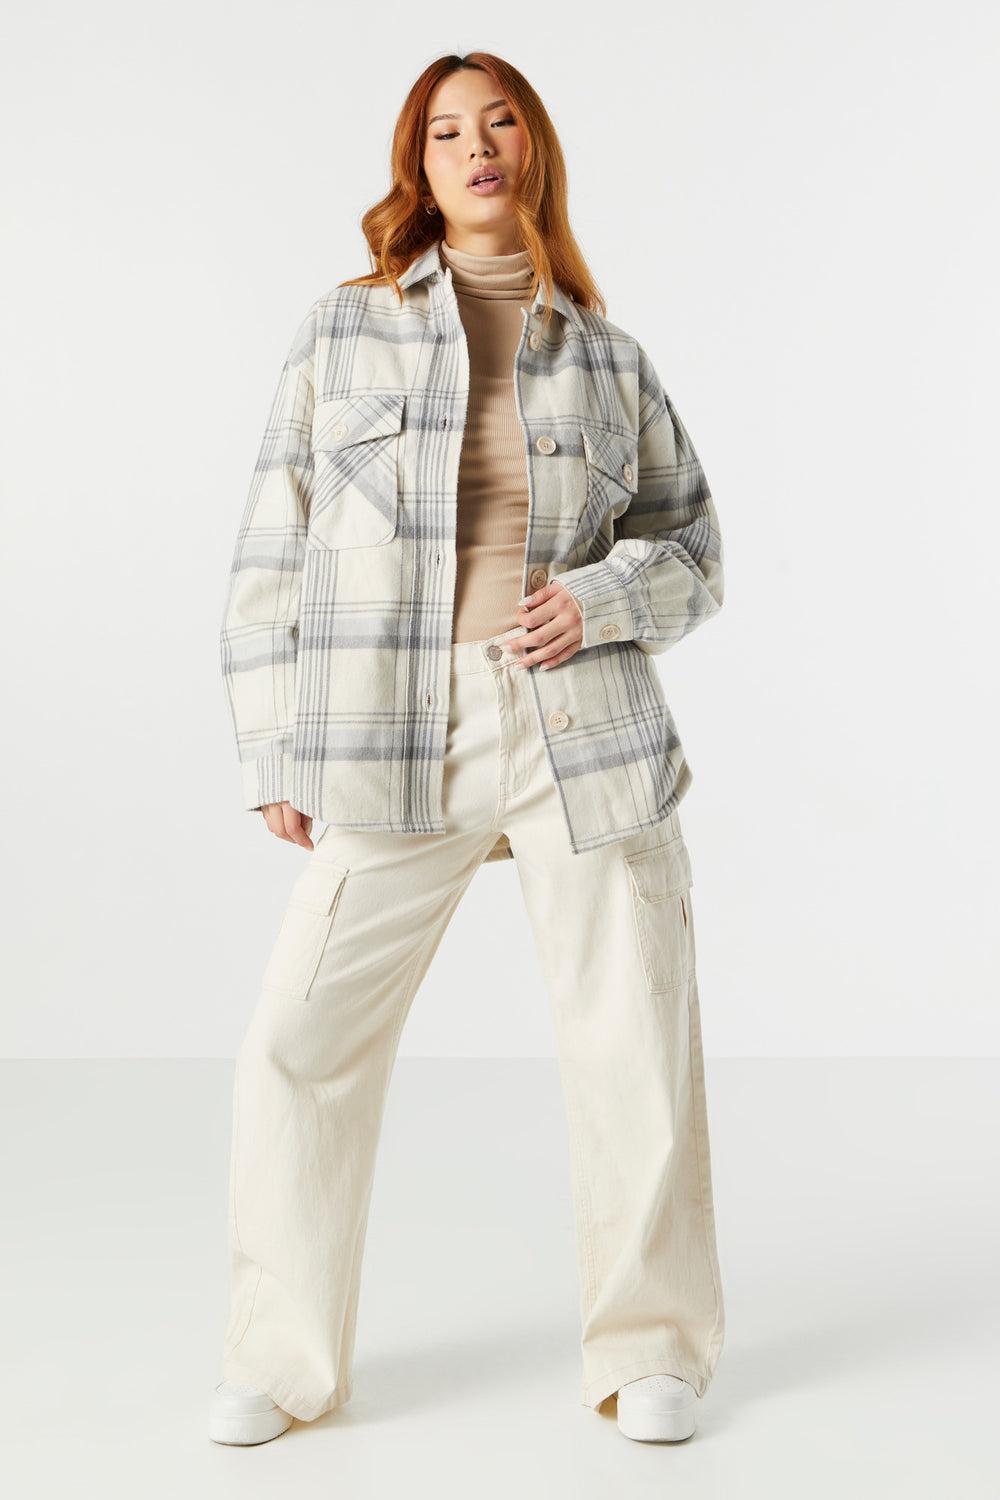 Grey and Blue Plaid Sherpa Flannel Grey and Blue Plaid Sherpa Flannel 56